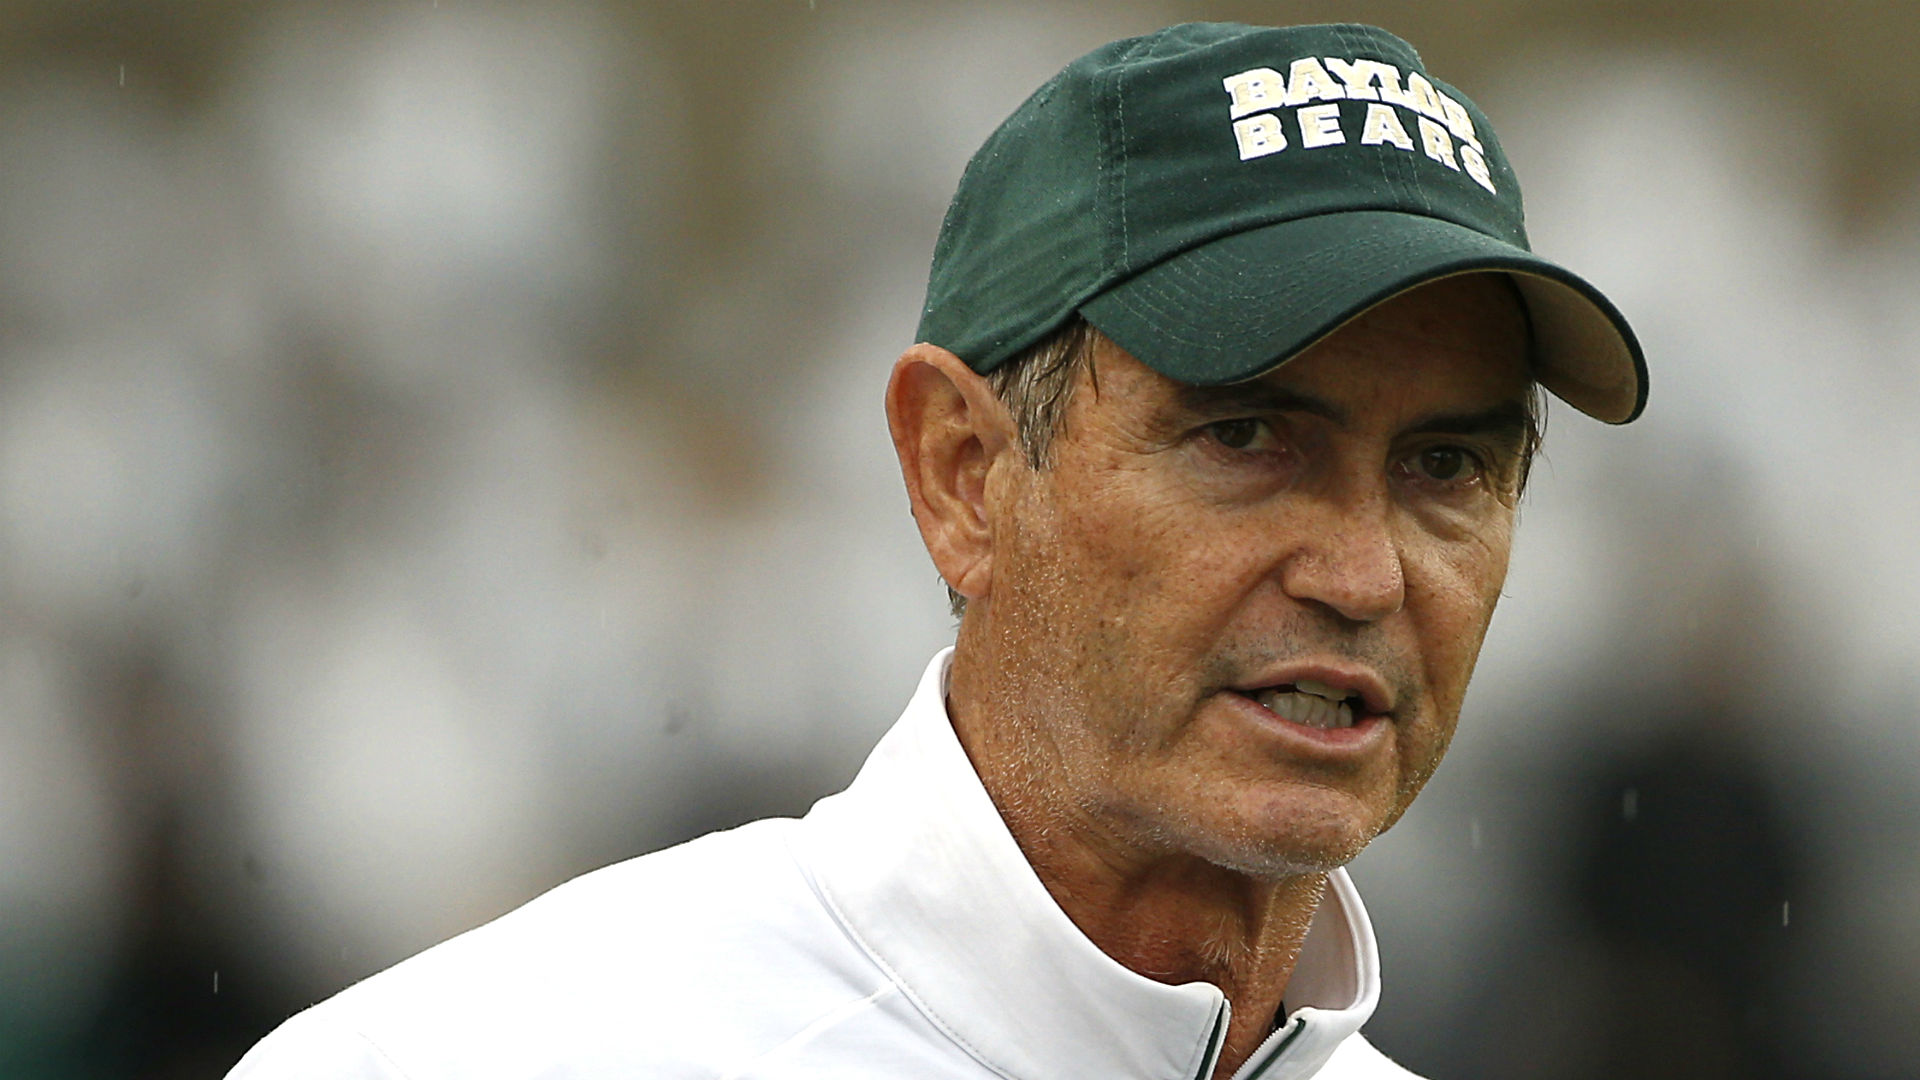 Mount Vernon ISD Hires Former Baylor Head Coach Art Briles as Head Football Coach. Briles Previously Forced Out of Football Due to Sexual Assault Scandal at Baylor.